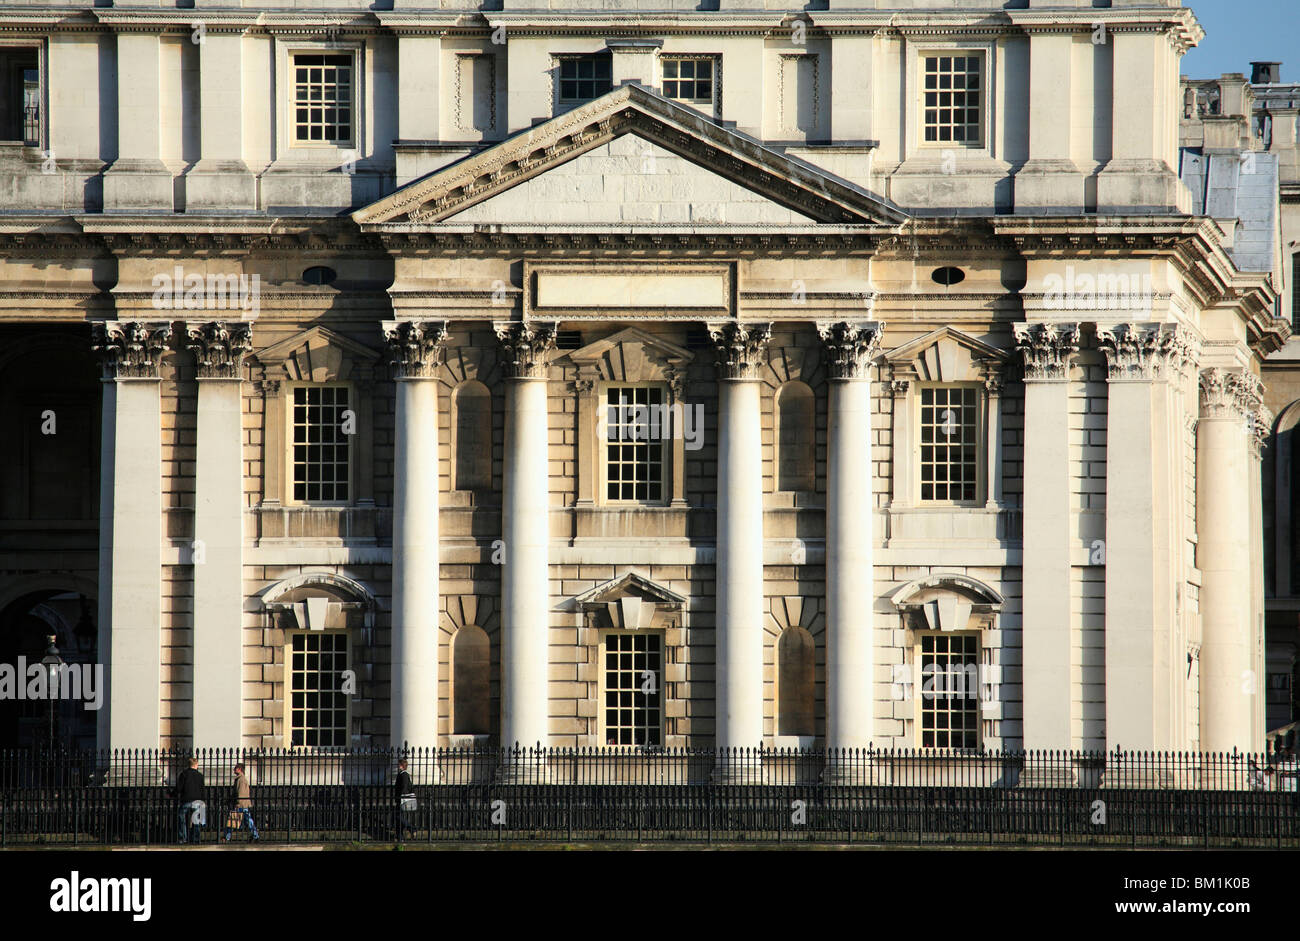 The East wing of the Royal Naval college, Greenwich showing the fine columns in the style of the Pantheon with a pediment over. Stock Photo